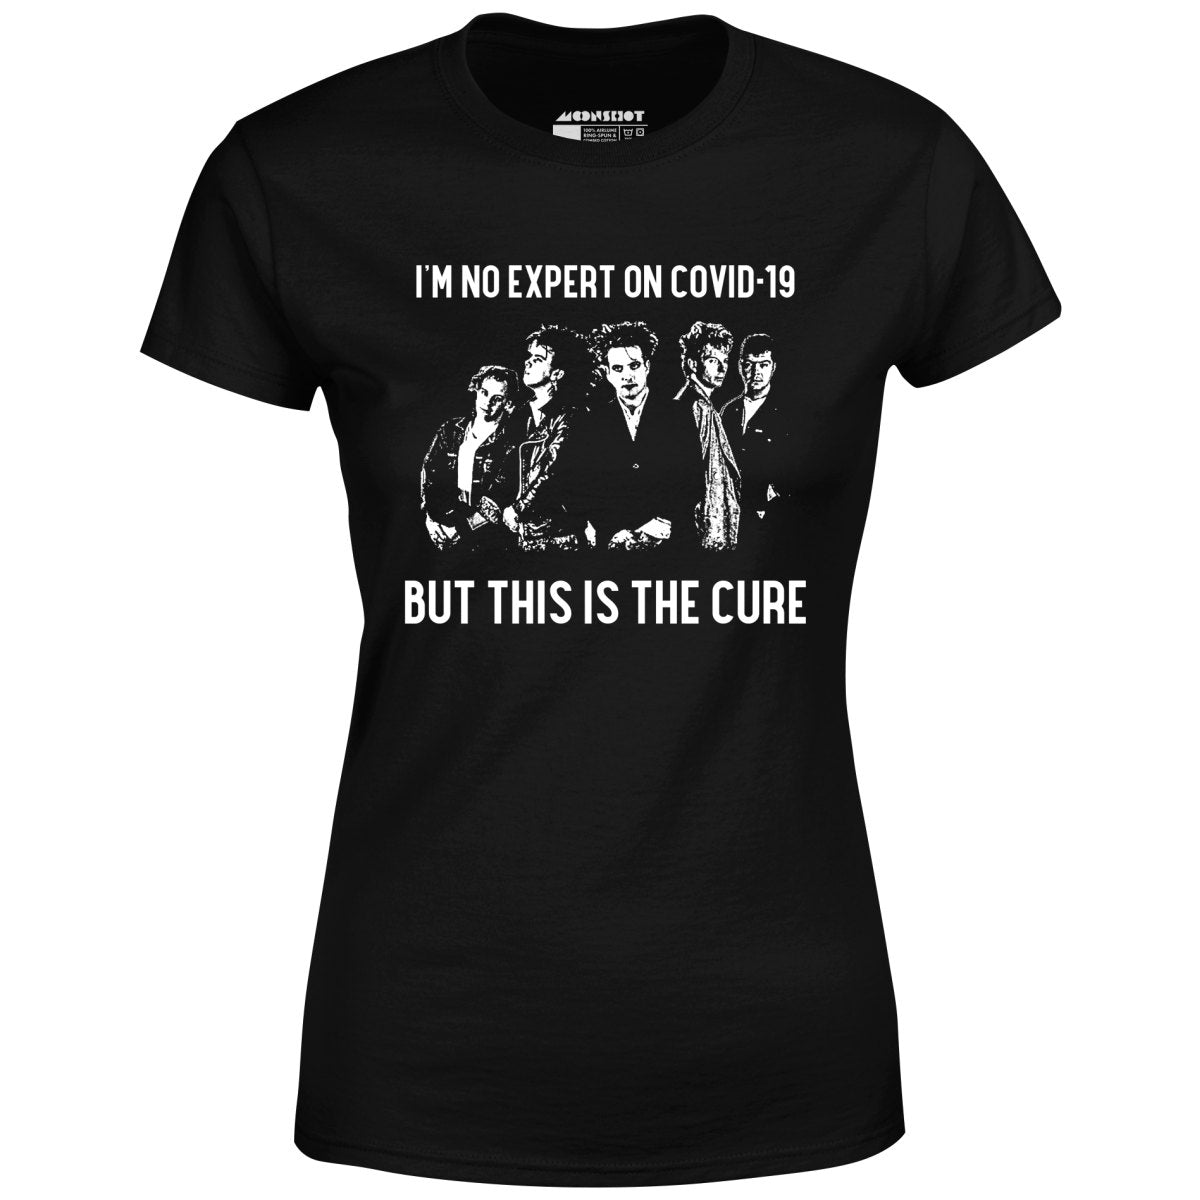 This is The Cure Mashup Parody - Women's T-Shirt